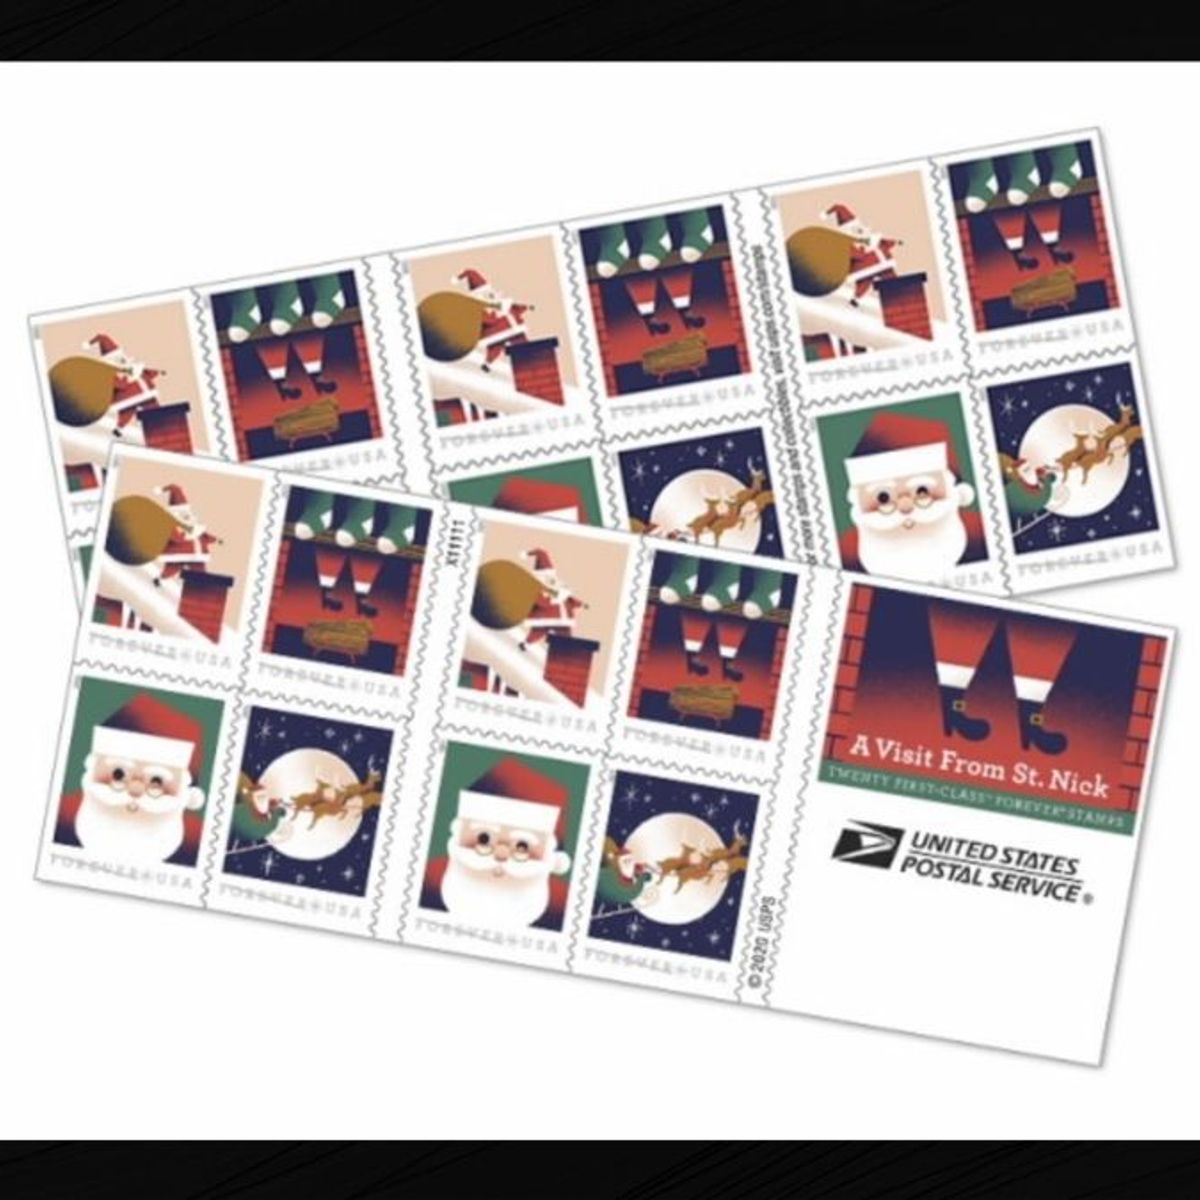 Christmas Stamps (USPS Postage Stamps for Holiday Mail)